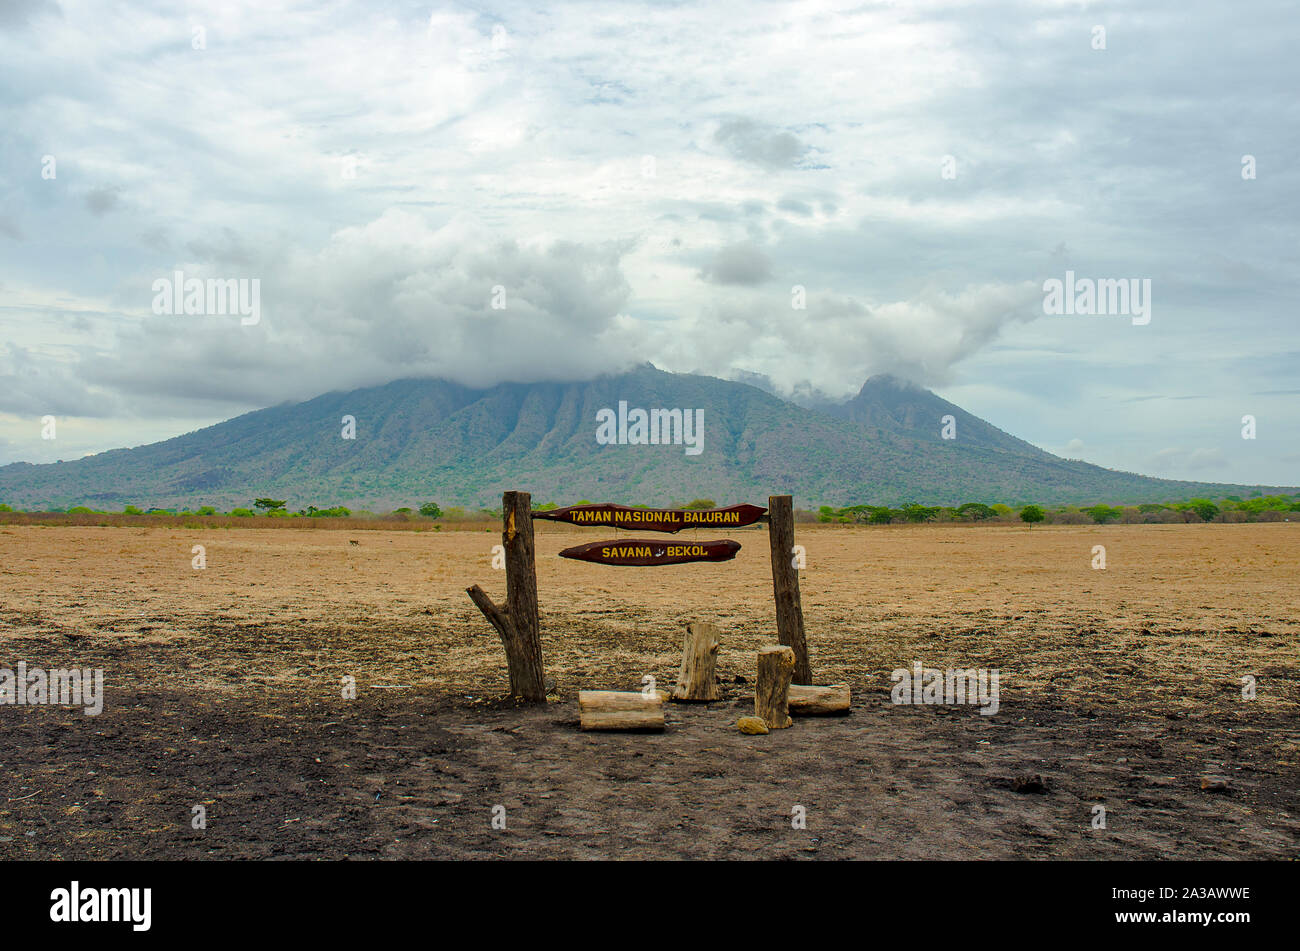 Sign board at Baluran National Park with Mount Baluran in the background, Situbondo, East Java, Indonesia Stock Photo